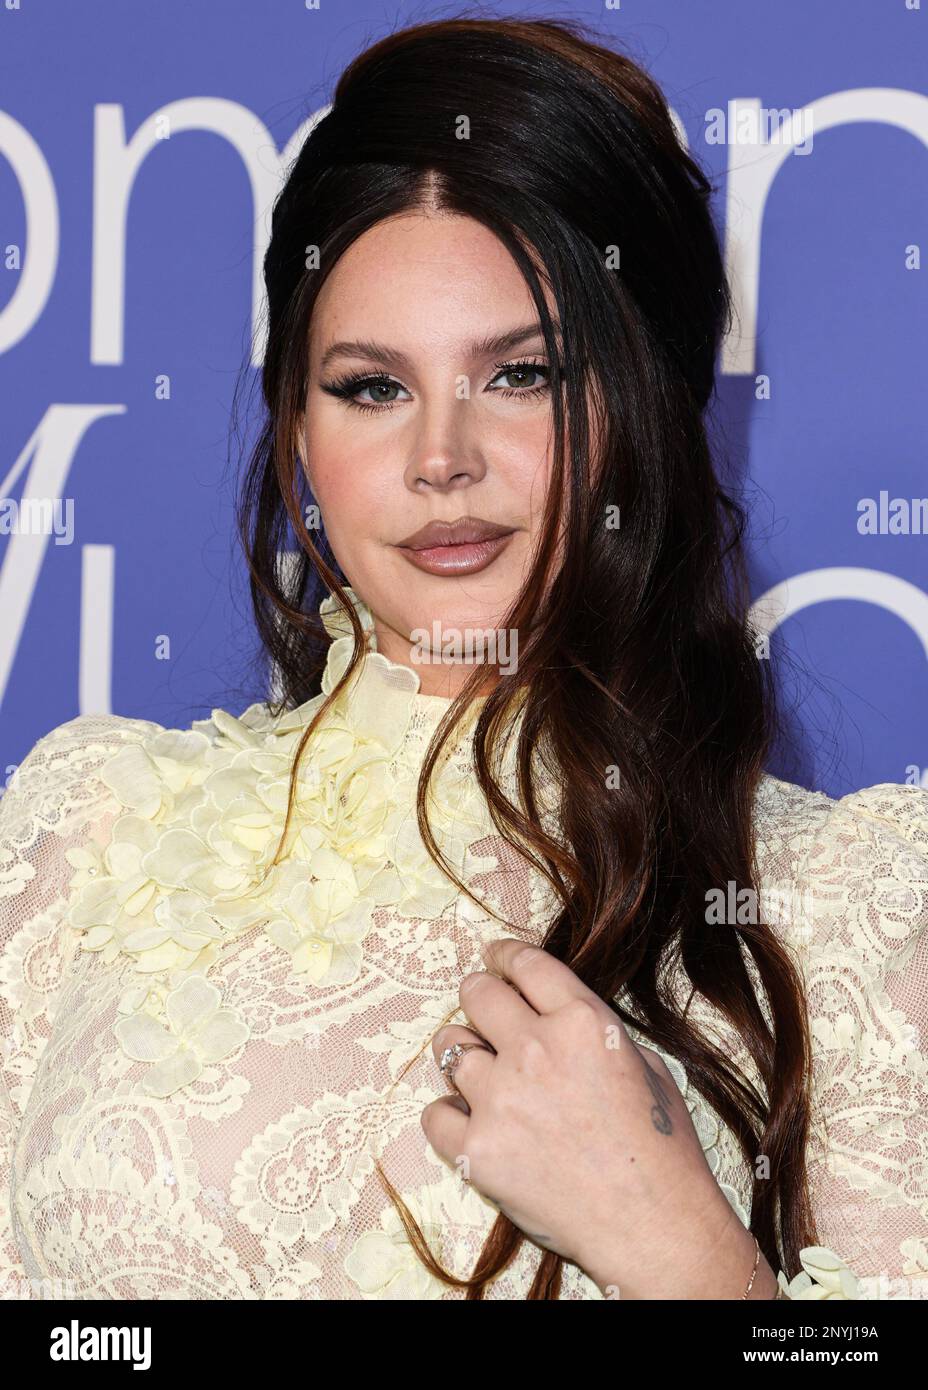 Inglewood, United States. 01st Mar, 2023. INGLEWOOD, LOS ANGELES, CALIFORNIA, USA - MARCH 01: Lana Del Rey wearing a Zimmermann dress arrives at the 2023 Billboard Women In Music held at the YouTube Theater on March 1, 2023 in Inglewood, Los Angeles, California, United States. (Photo by Xavier Collin/Image Press Agency) Credit: Image Press Agency/Alamy Live News Stock Photo